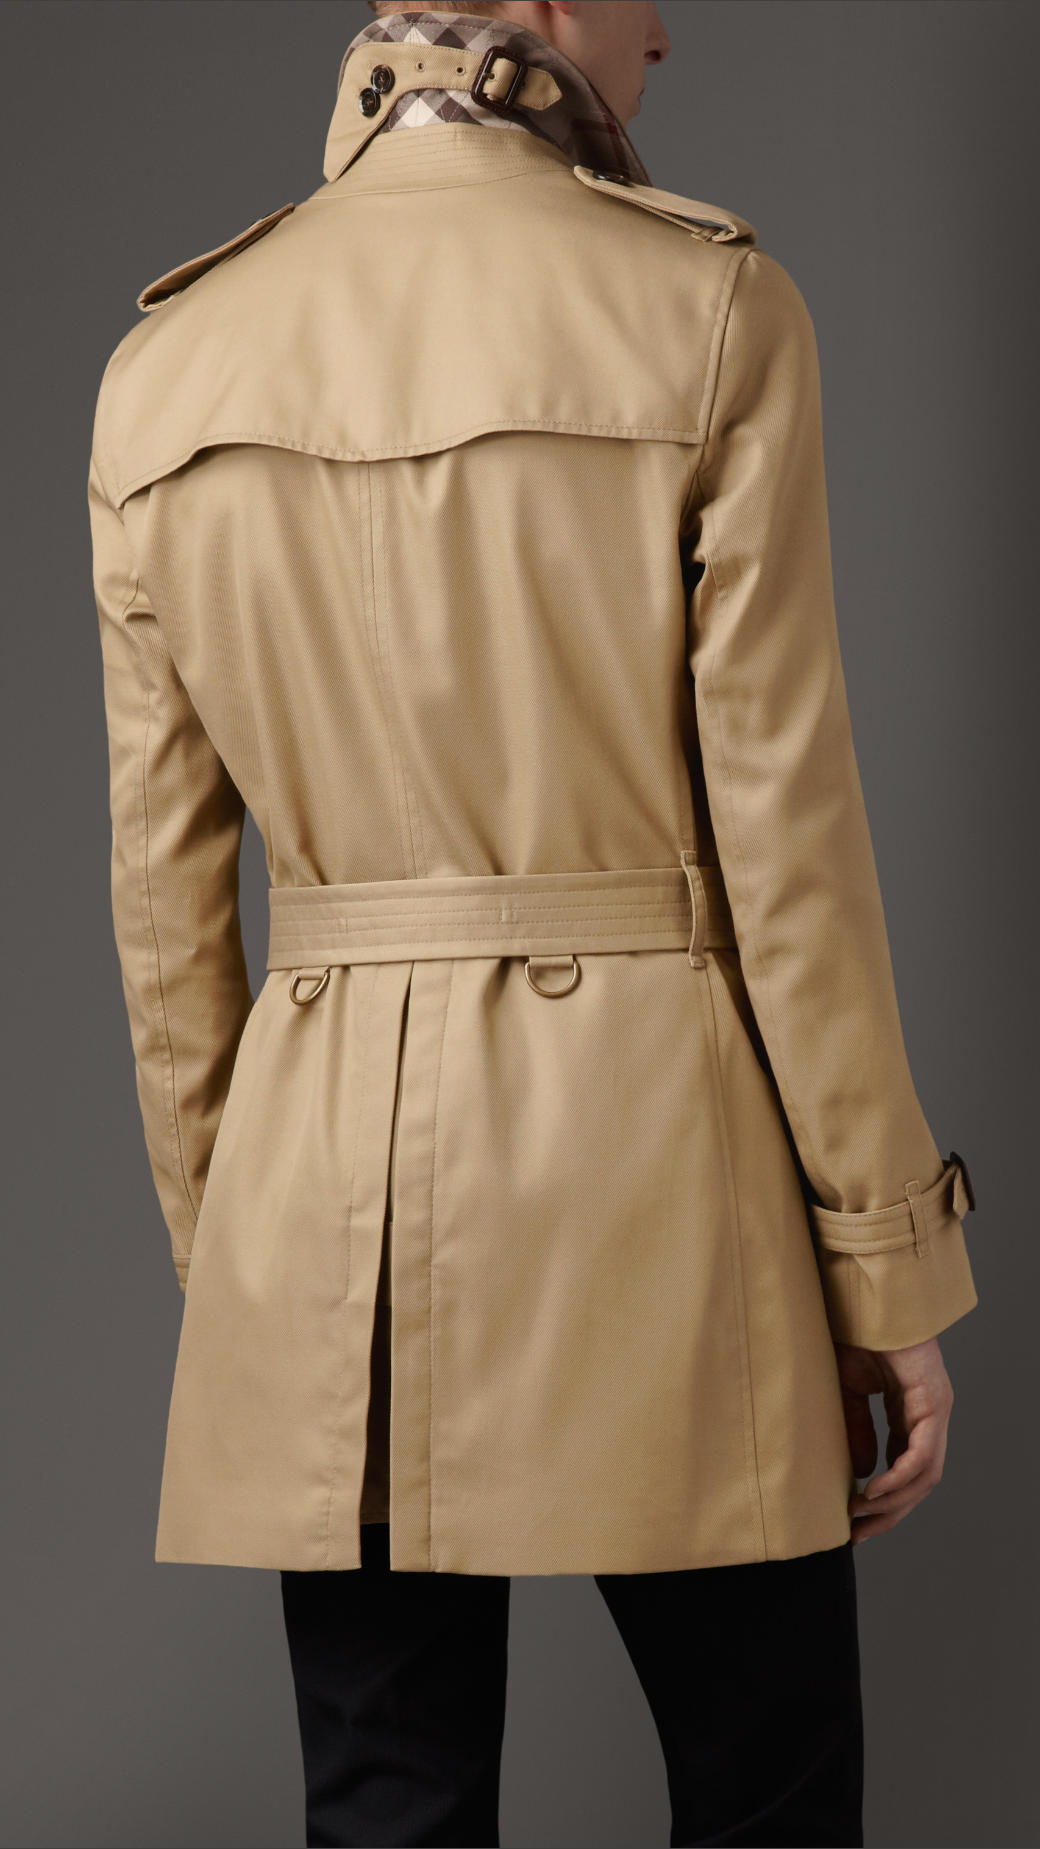 Burberry Mid Length Technical Cotton Trench Coat in Natural for Men - Lyst